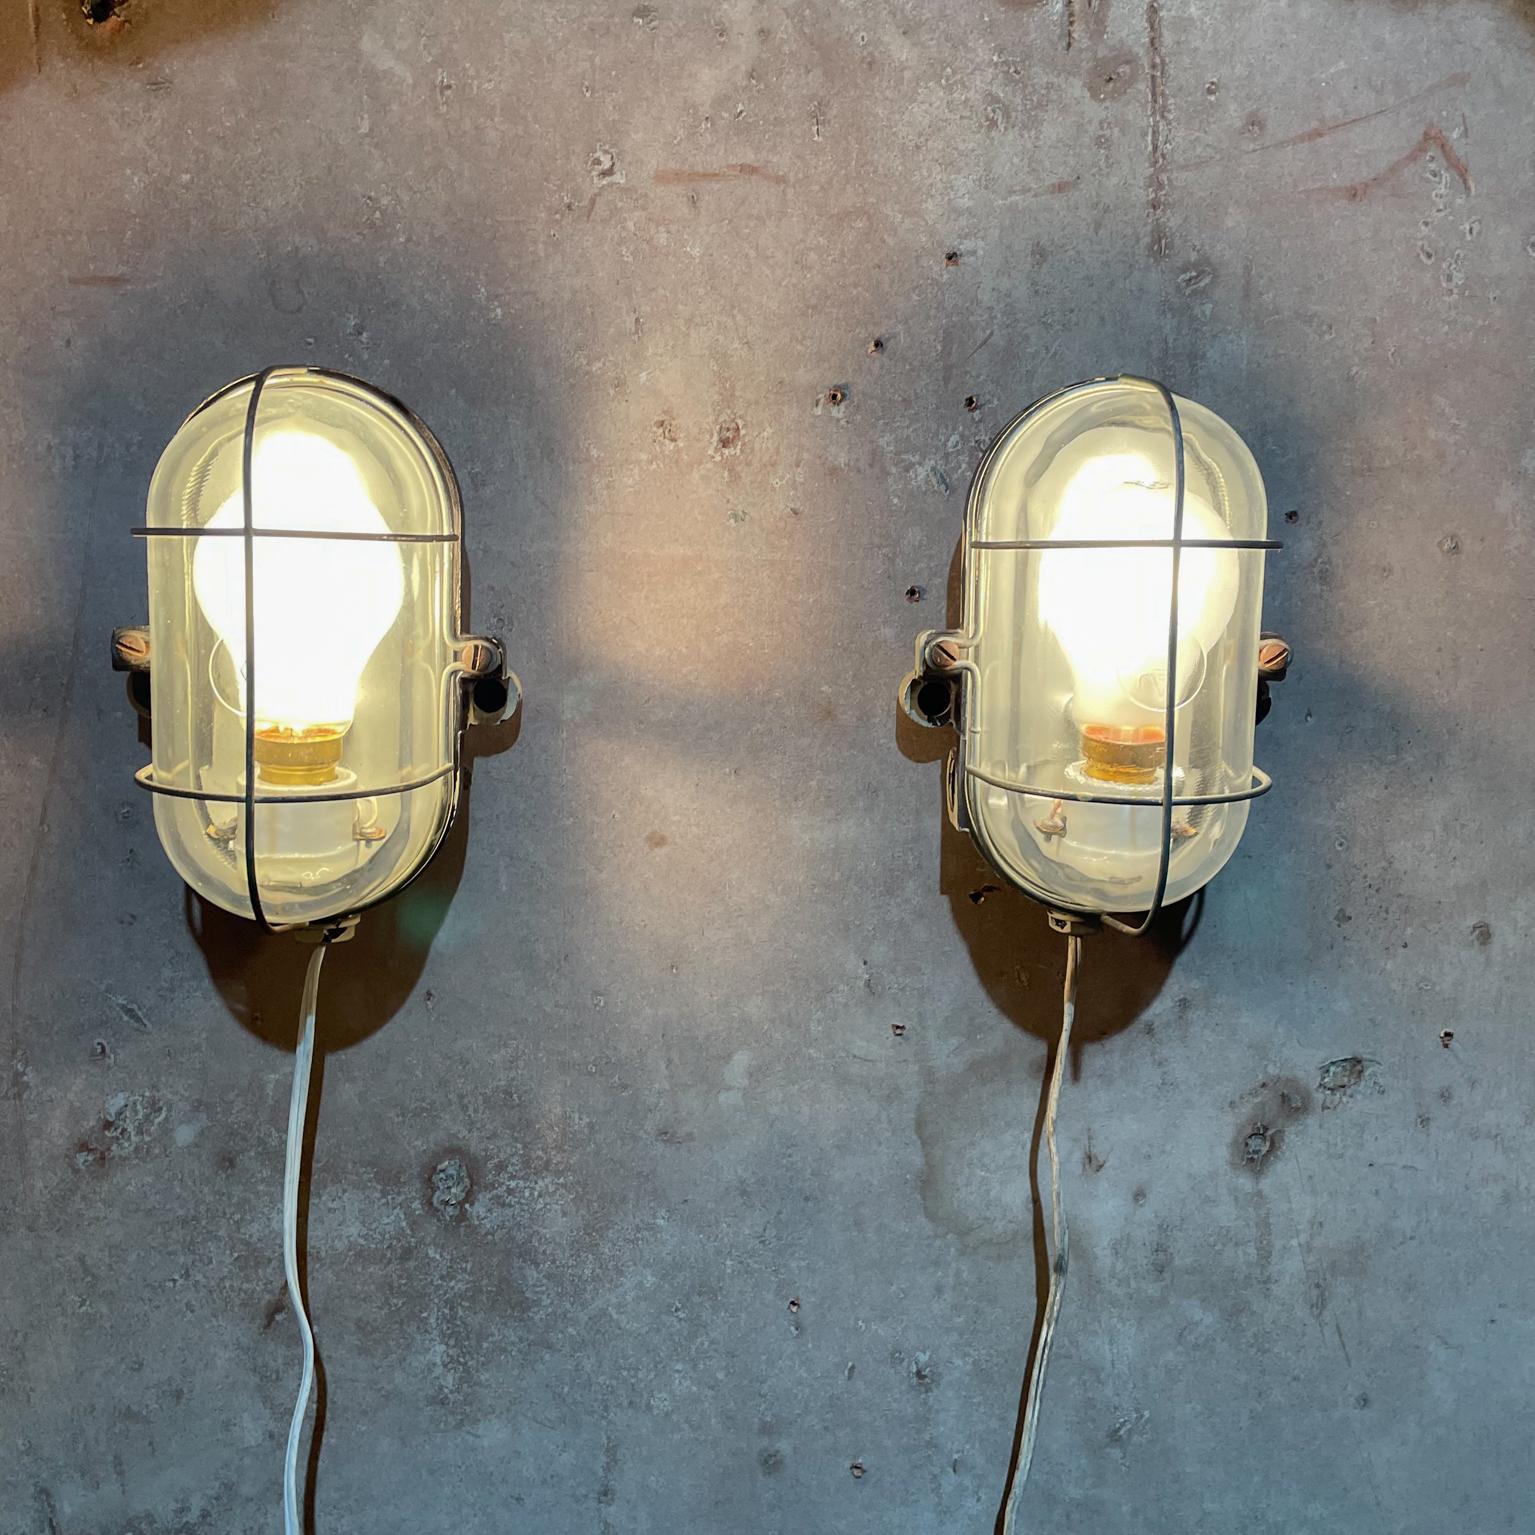 French Modern Industrial Wall Lamp Sconces Metal Grid with Bakelite 1950s France For Sale 1